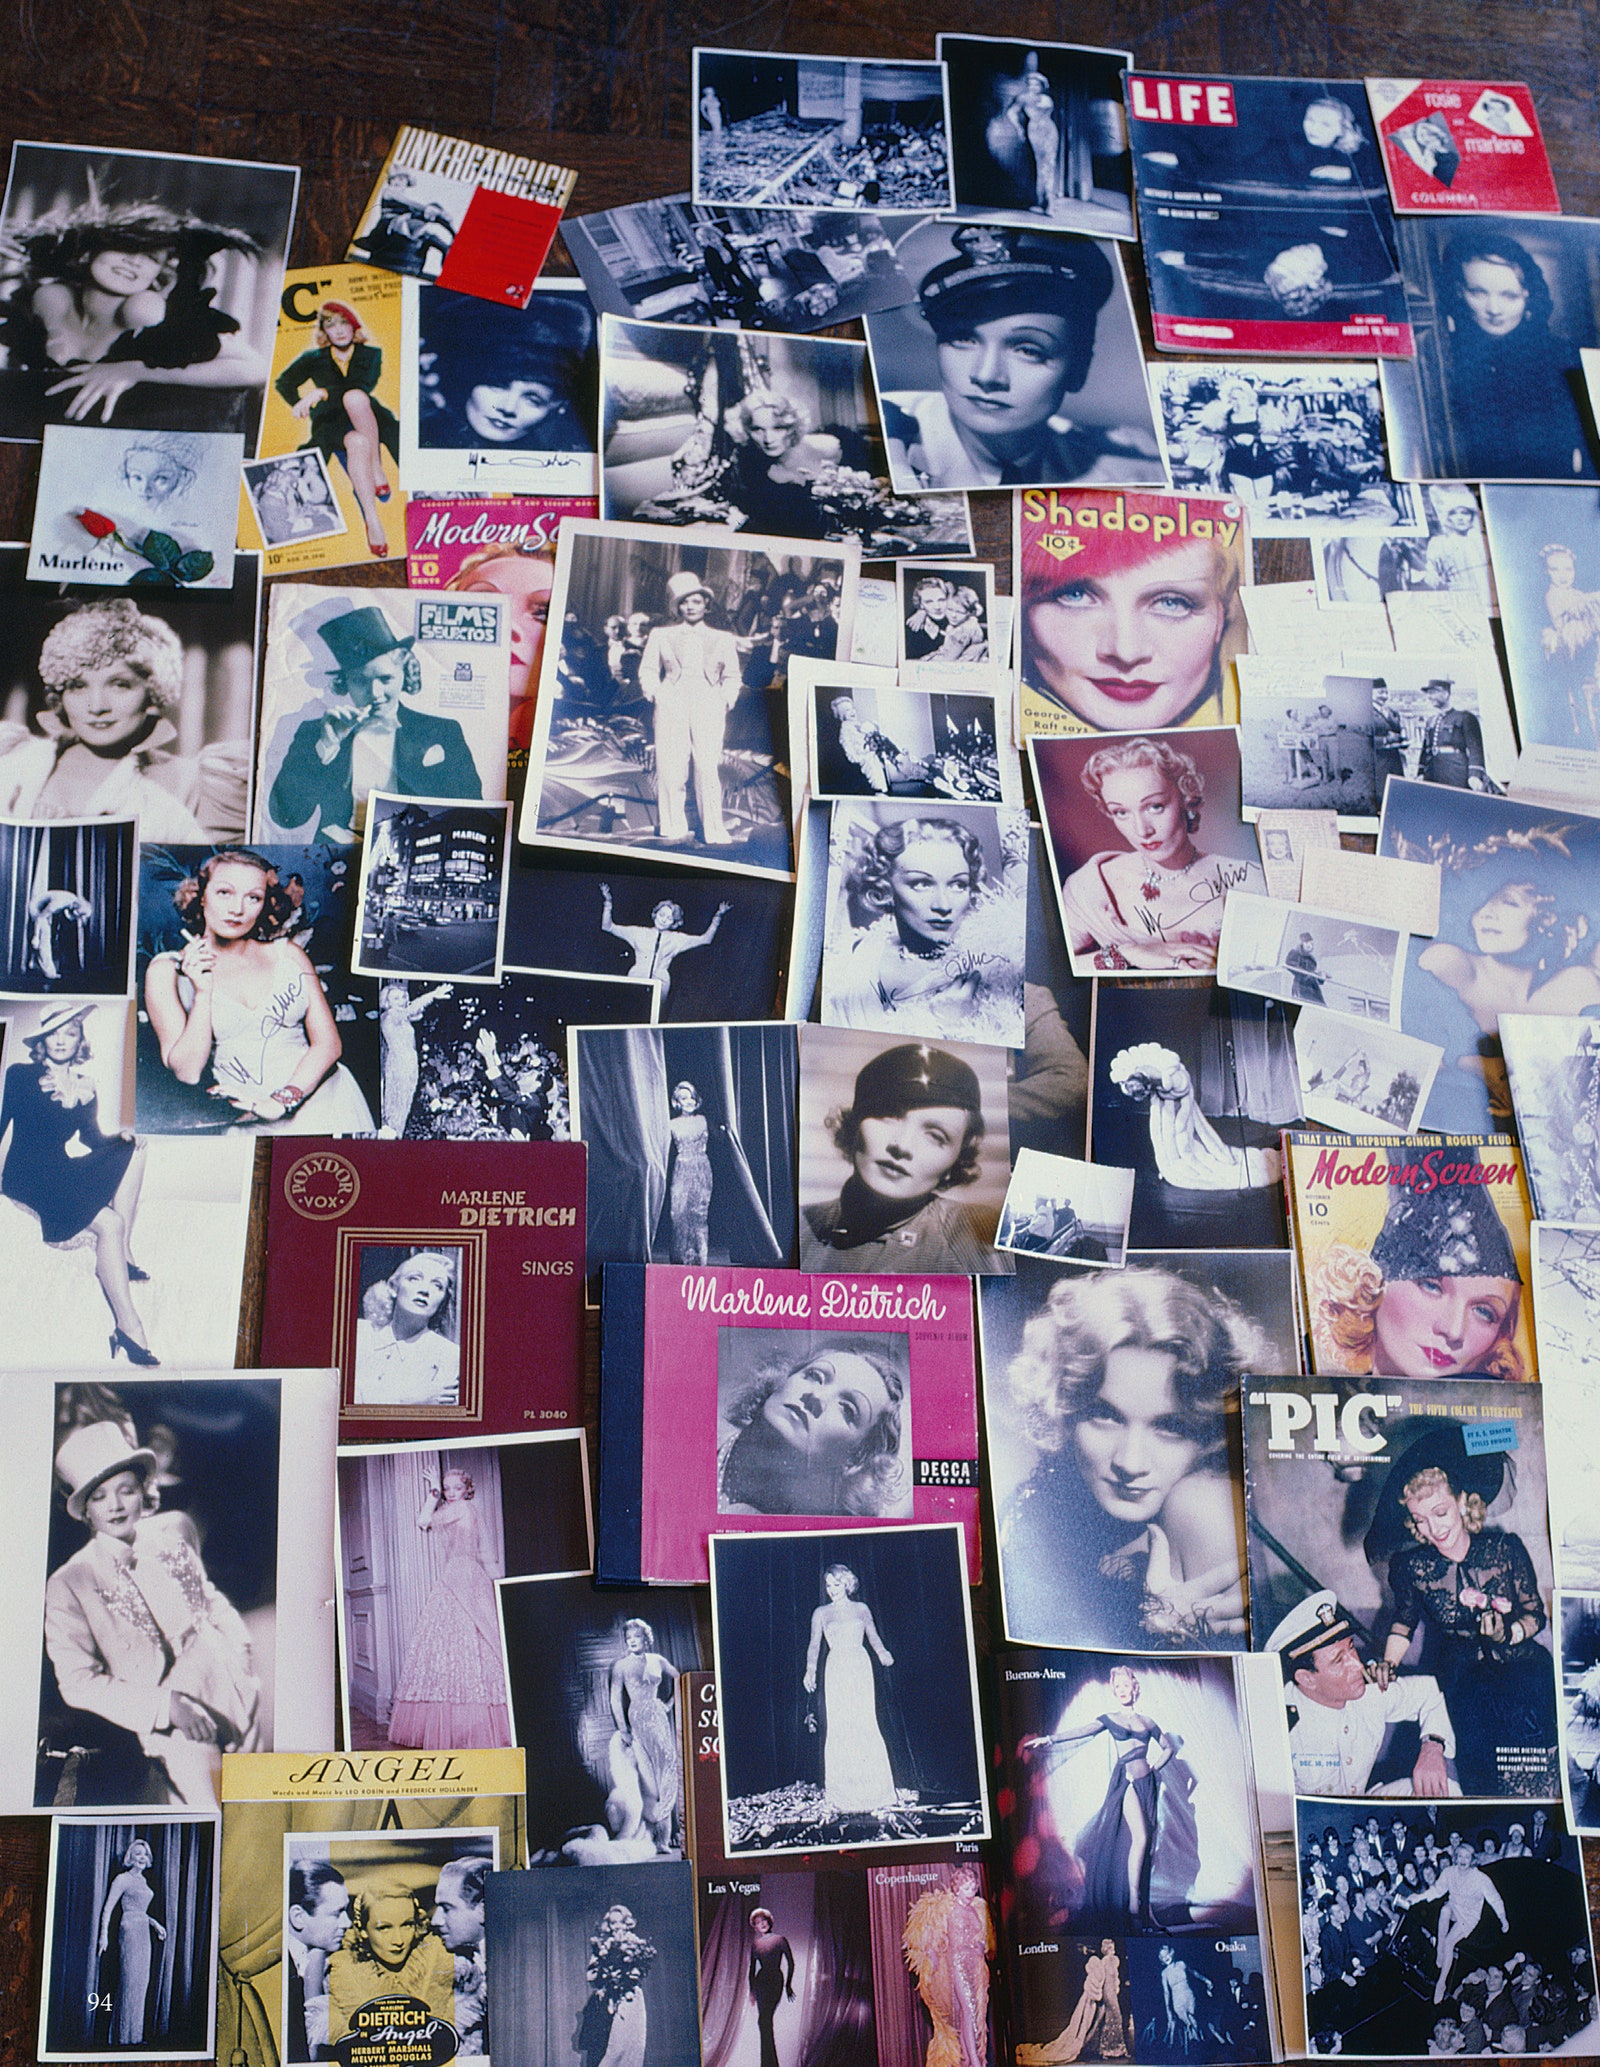 View of album covers and other ephemera displayed on a table